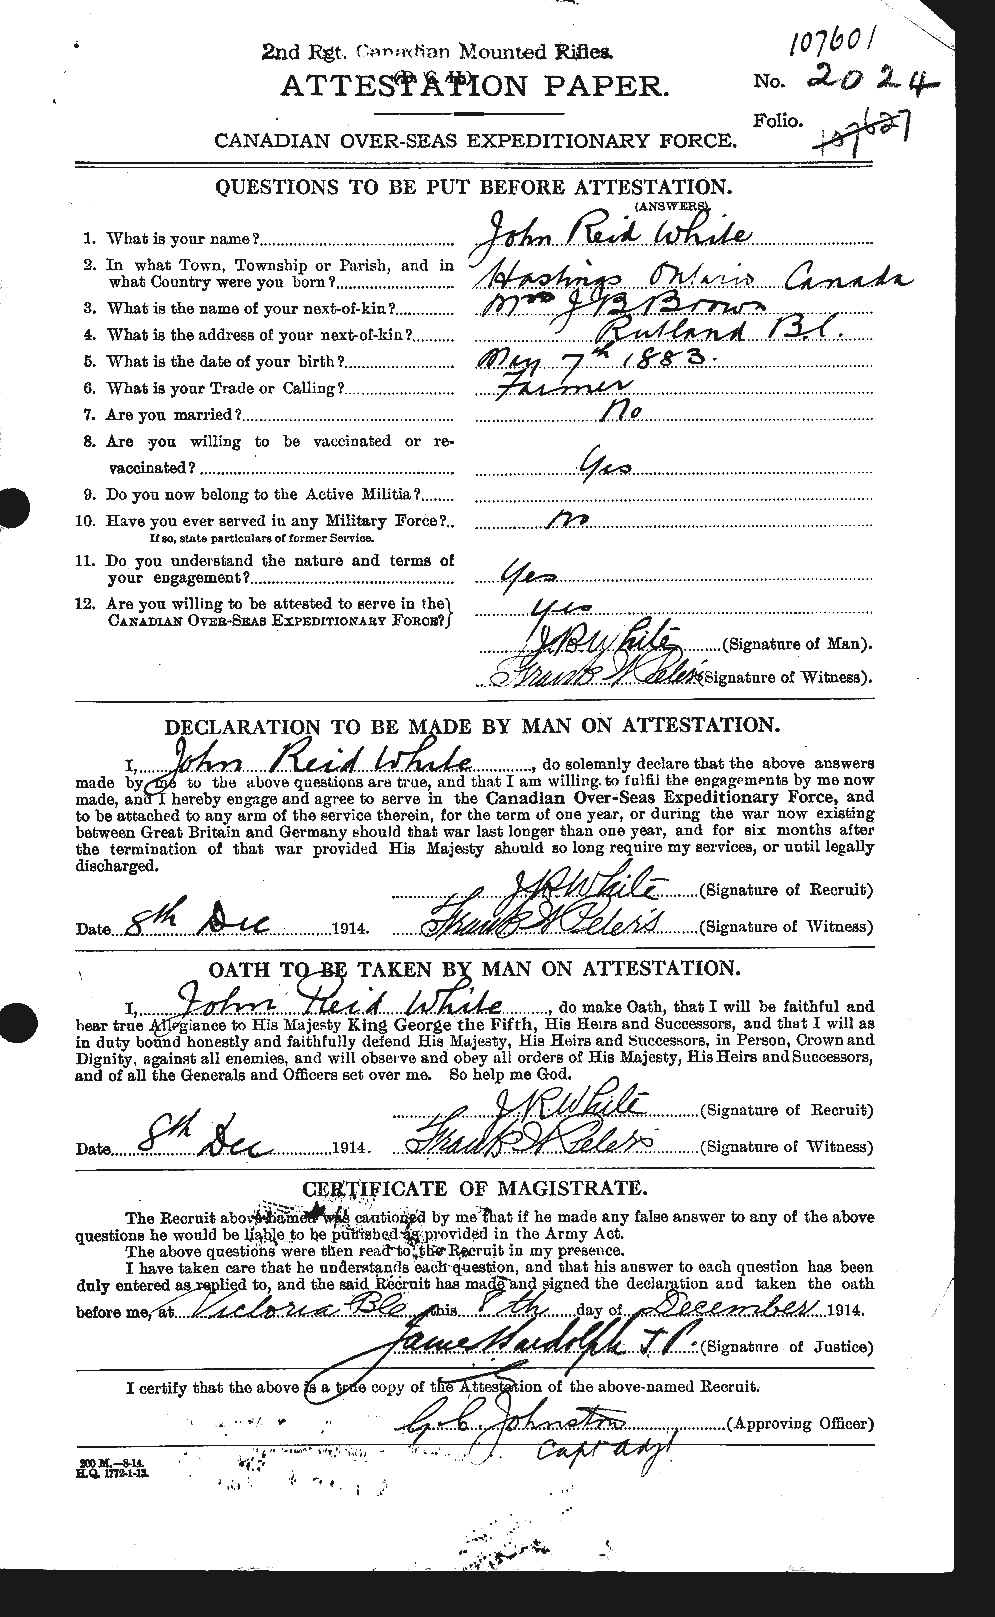 Personnel Records of the First World War - CEF 671589a